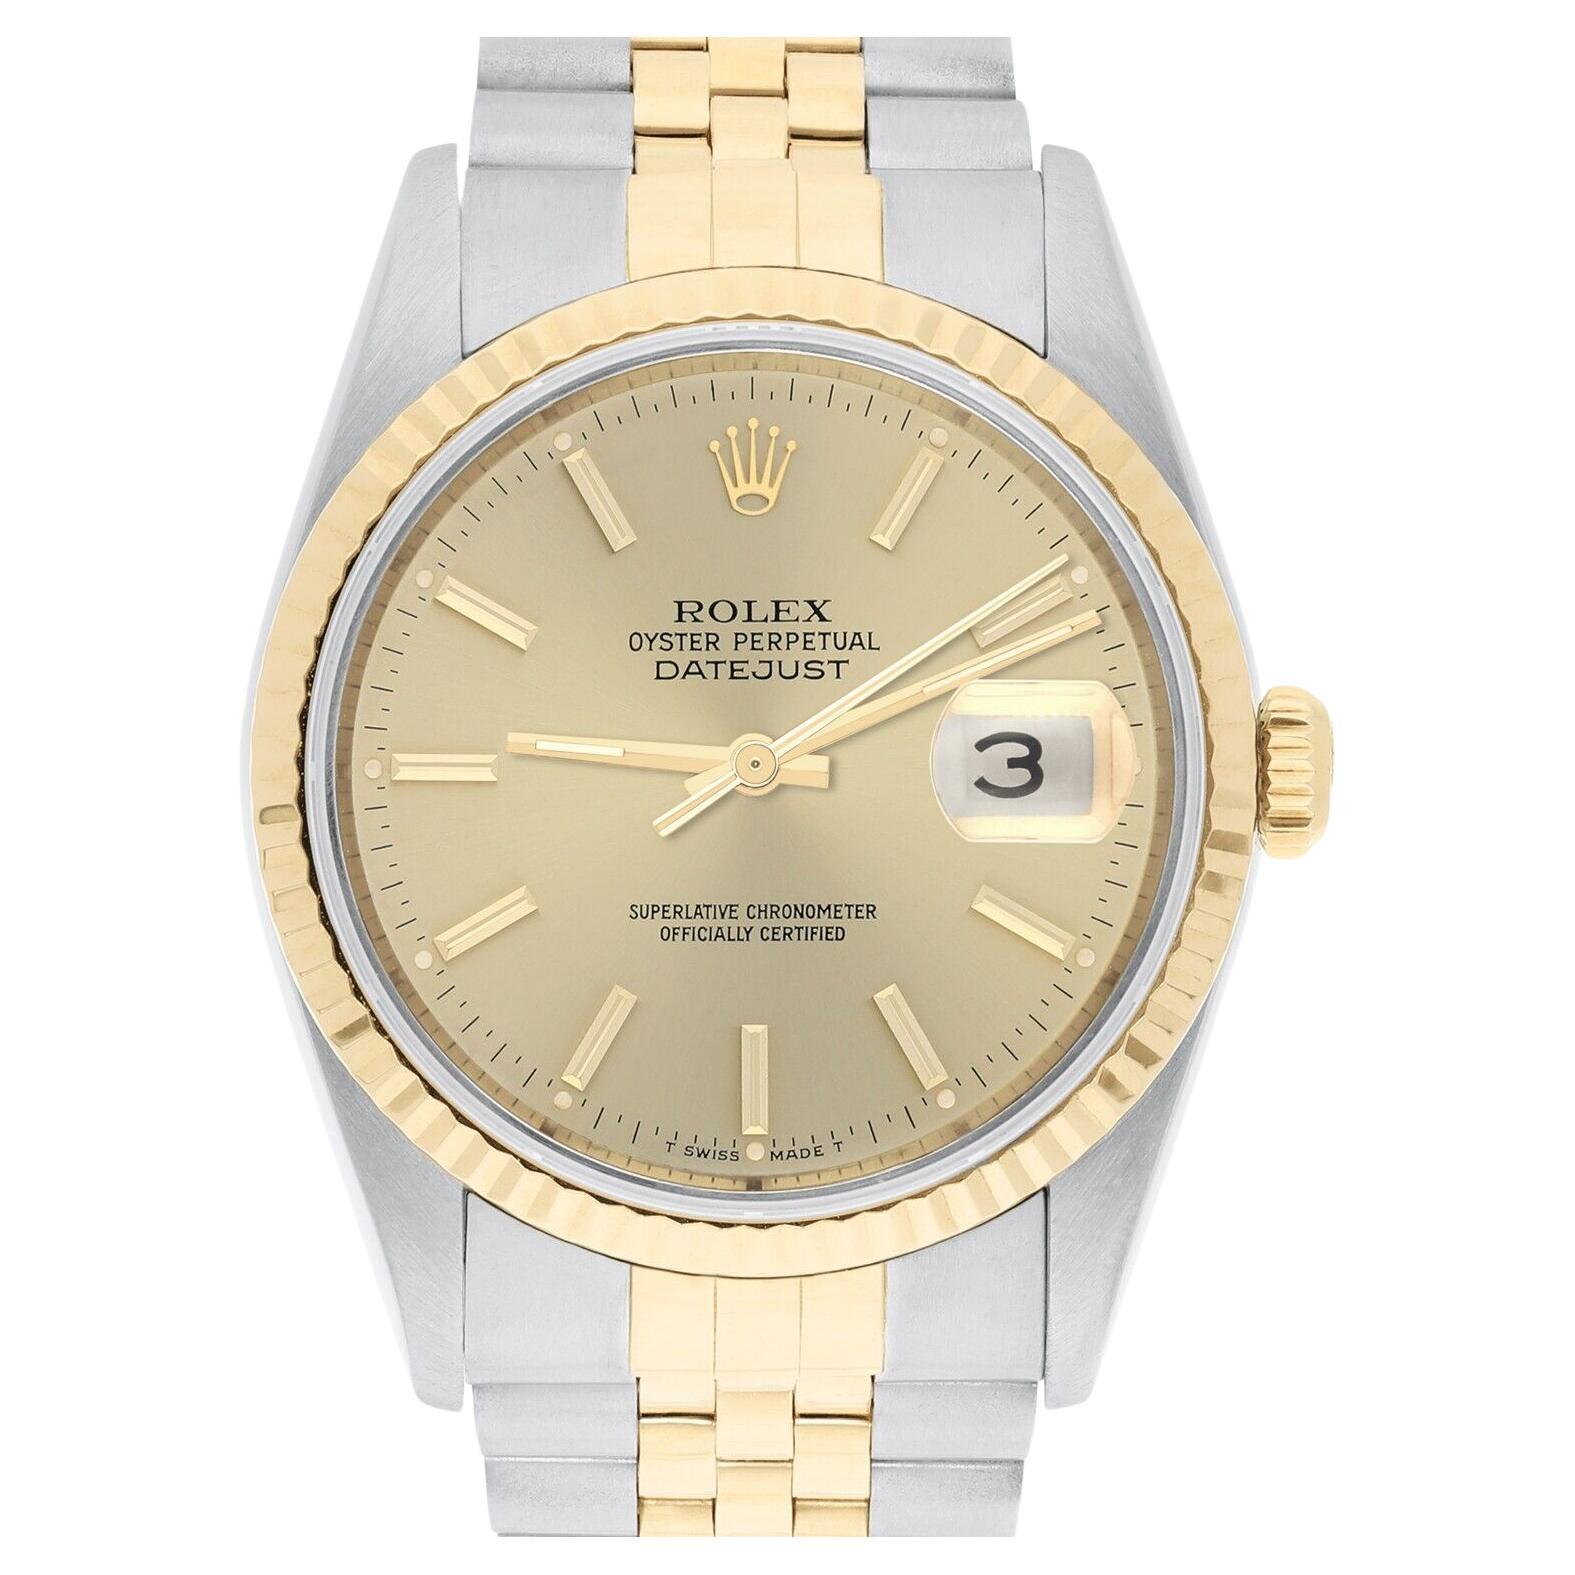 Rolex Datejust 36mm Two Tone Champagne Index Dial Jubilee 16233 Circa 2000 For Sale